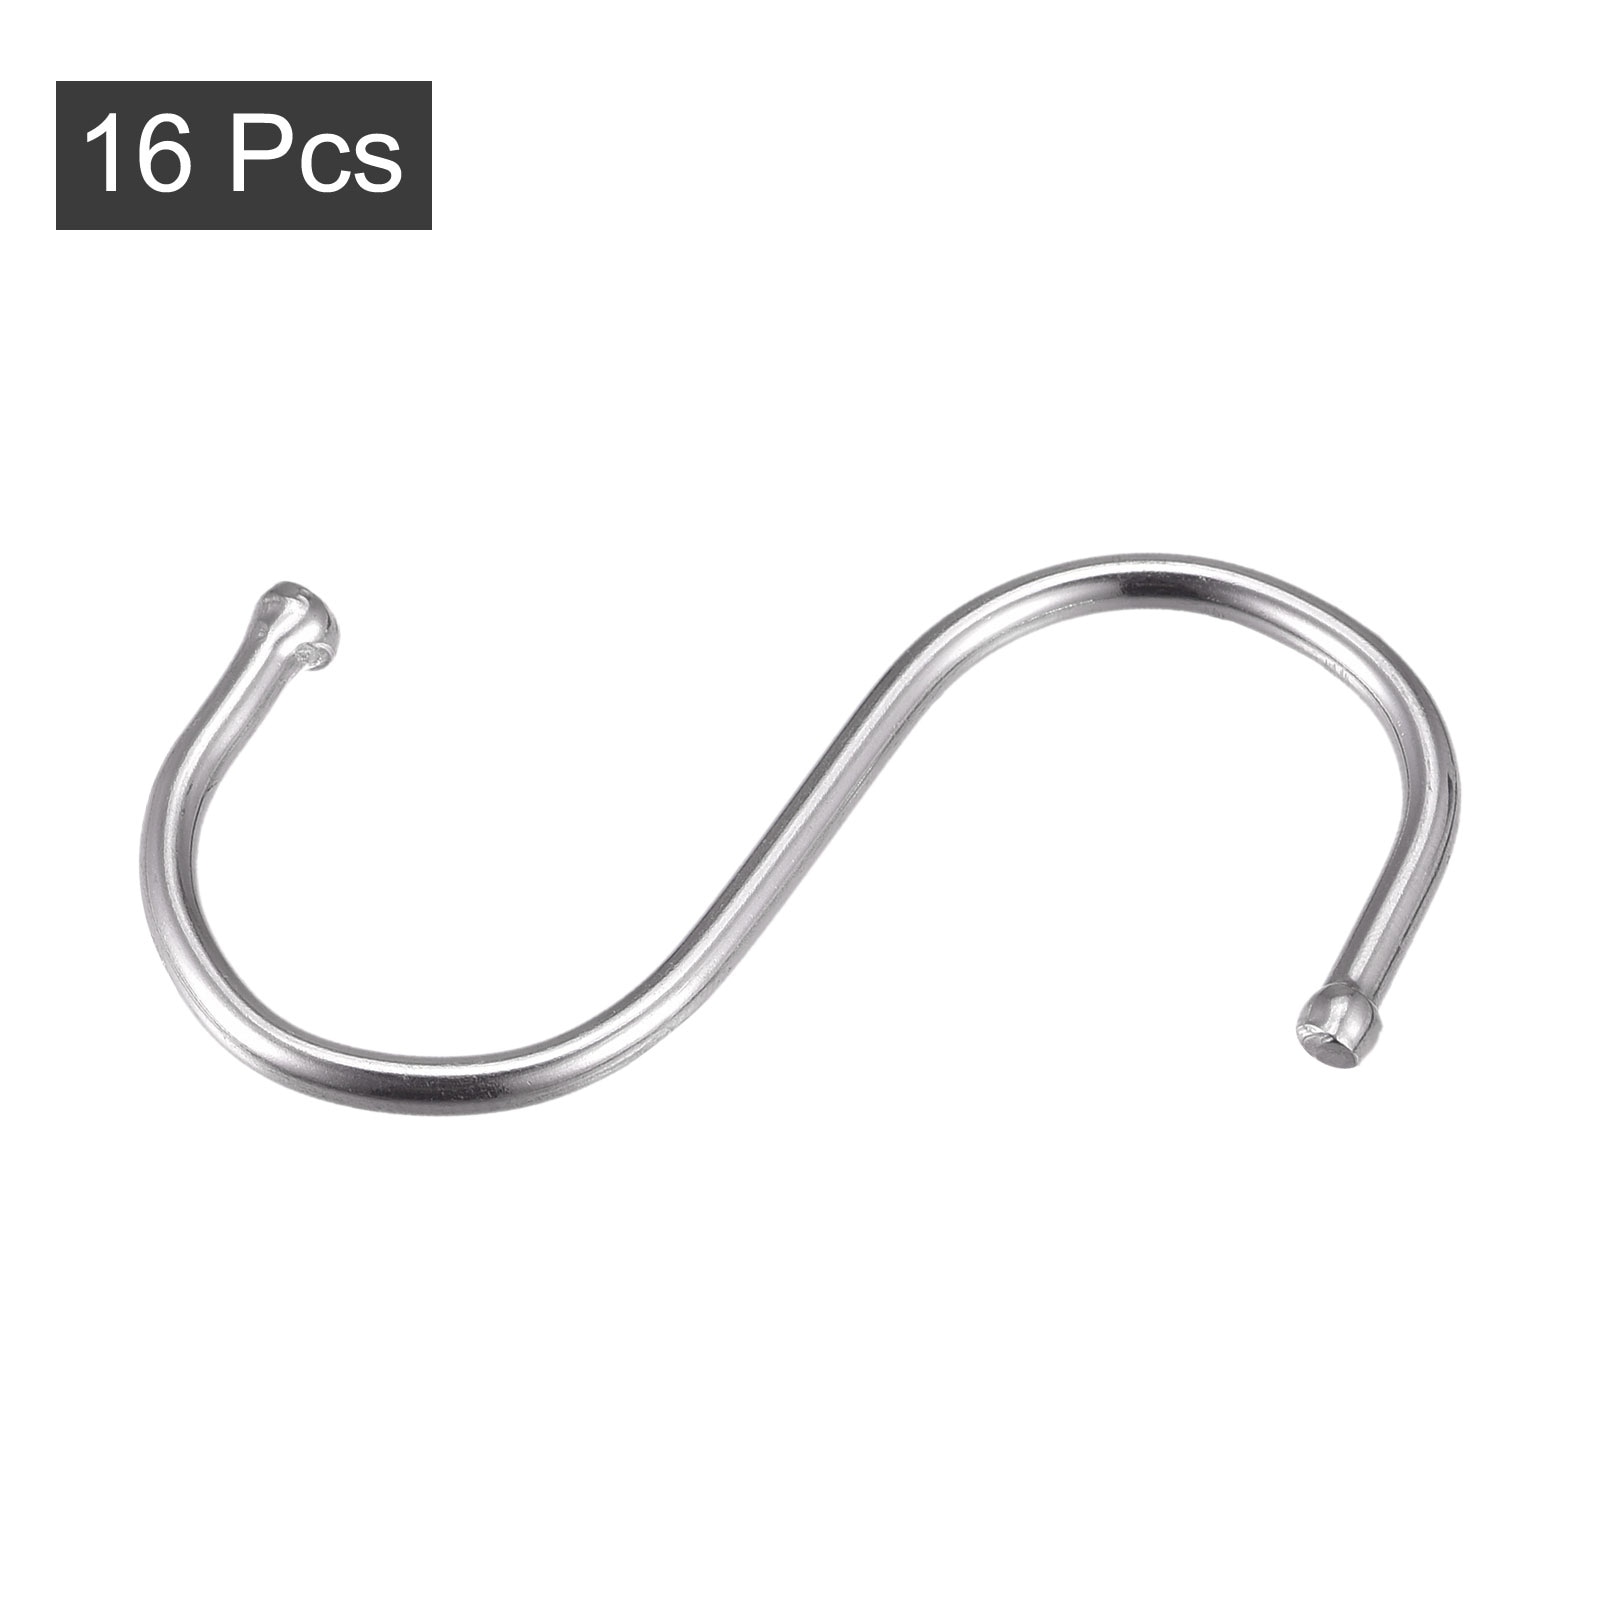 S Hooks 2.56 Stainless Steel Hanger for Hanging Silver Tone 16Pack - Silver  Tone - 65mm - Bed Bath & Beyond - 35515285